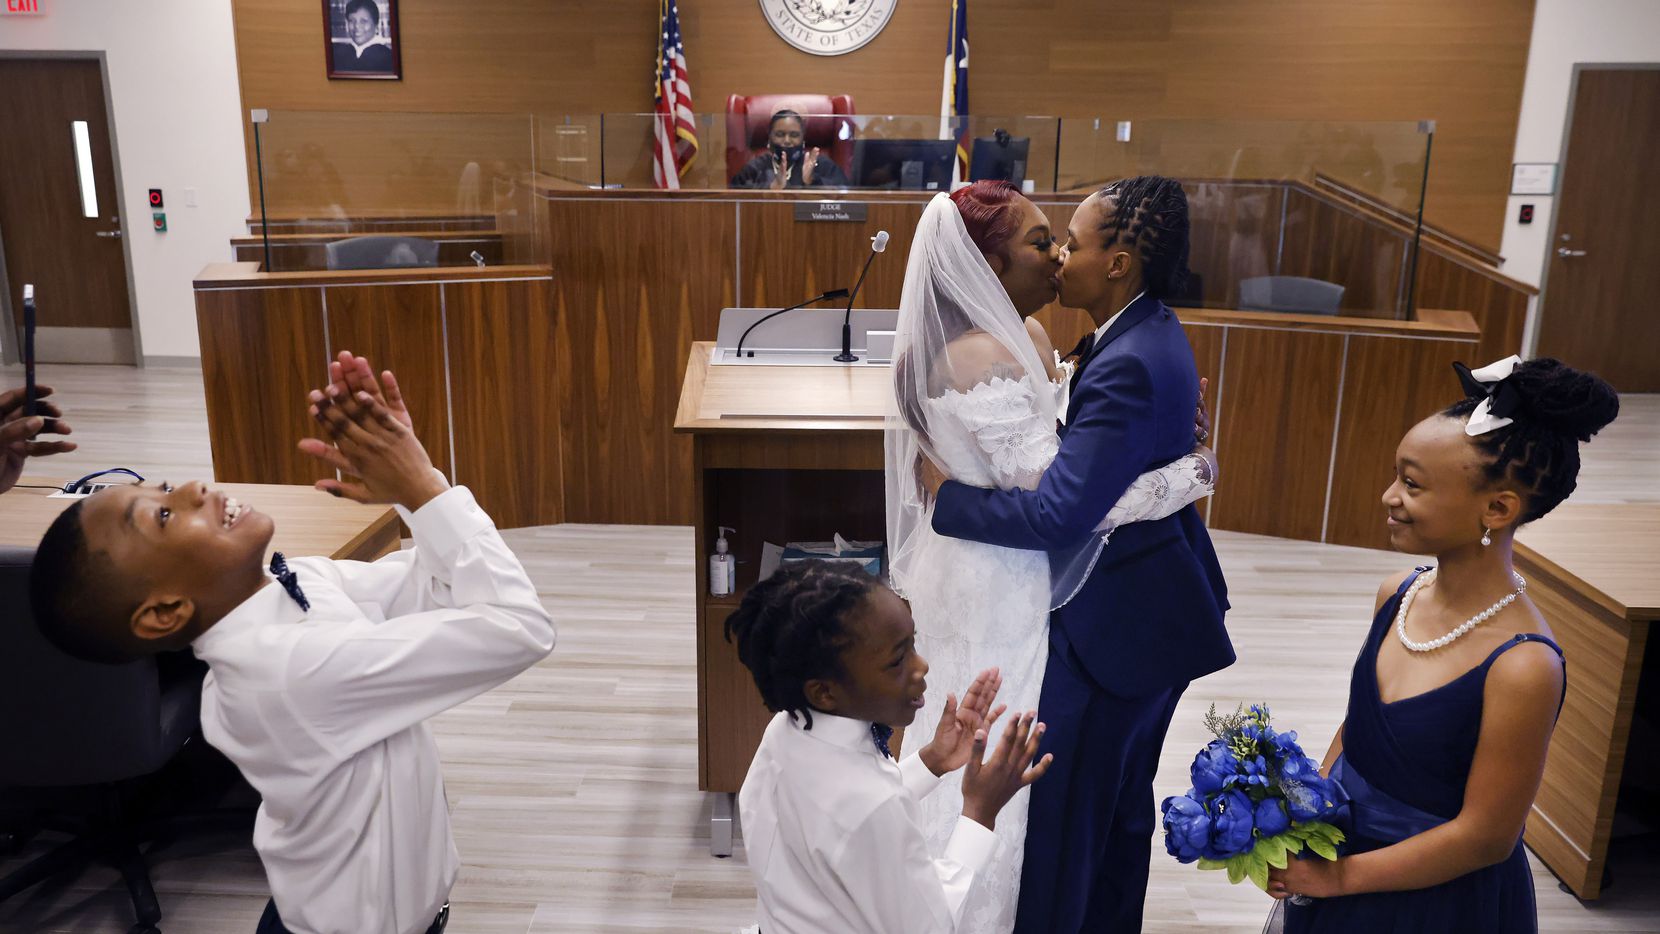 Two cute: Couples flock to Dallas courthouse for 2/22/22 weddings